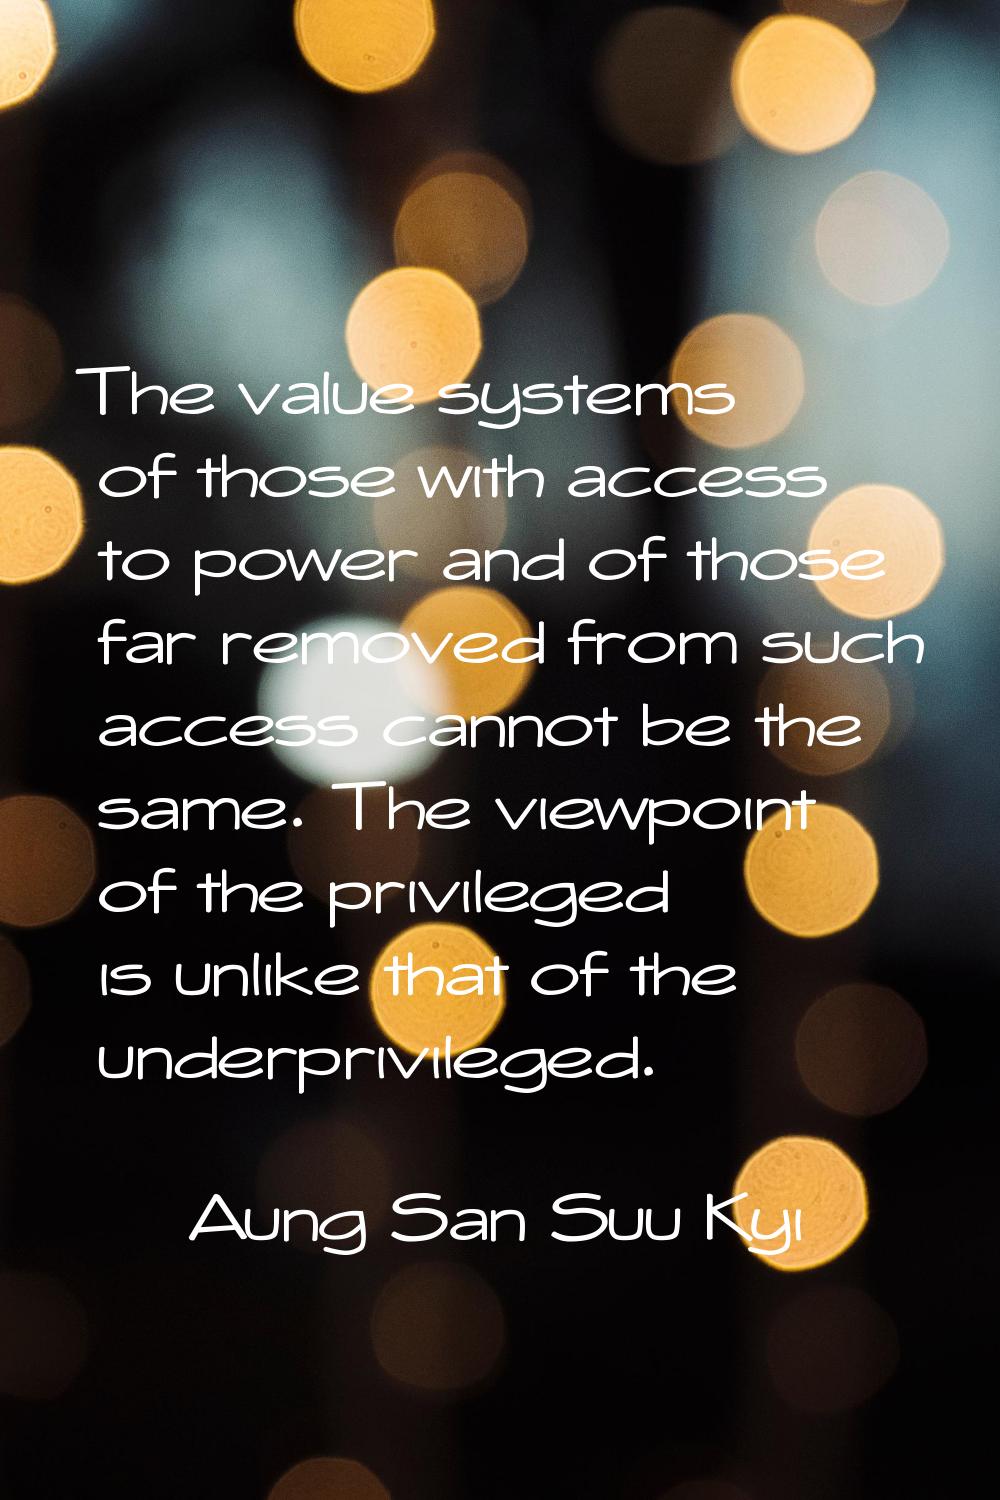 The value systems of those with access to power and of those far removed from such access cannot be